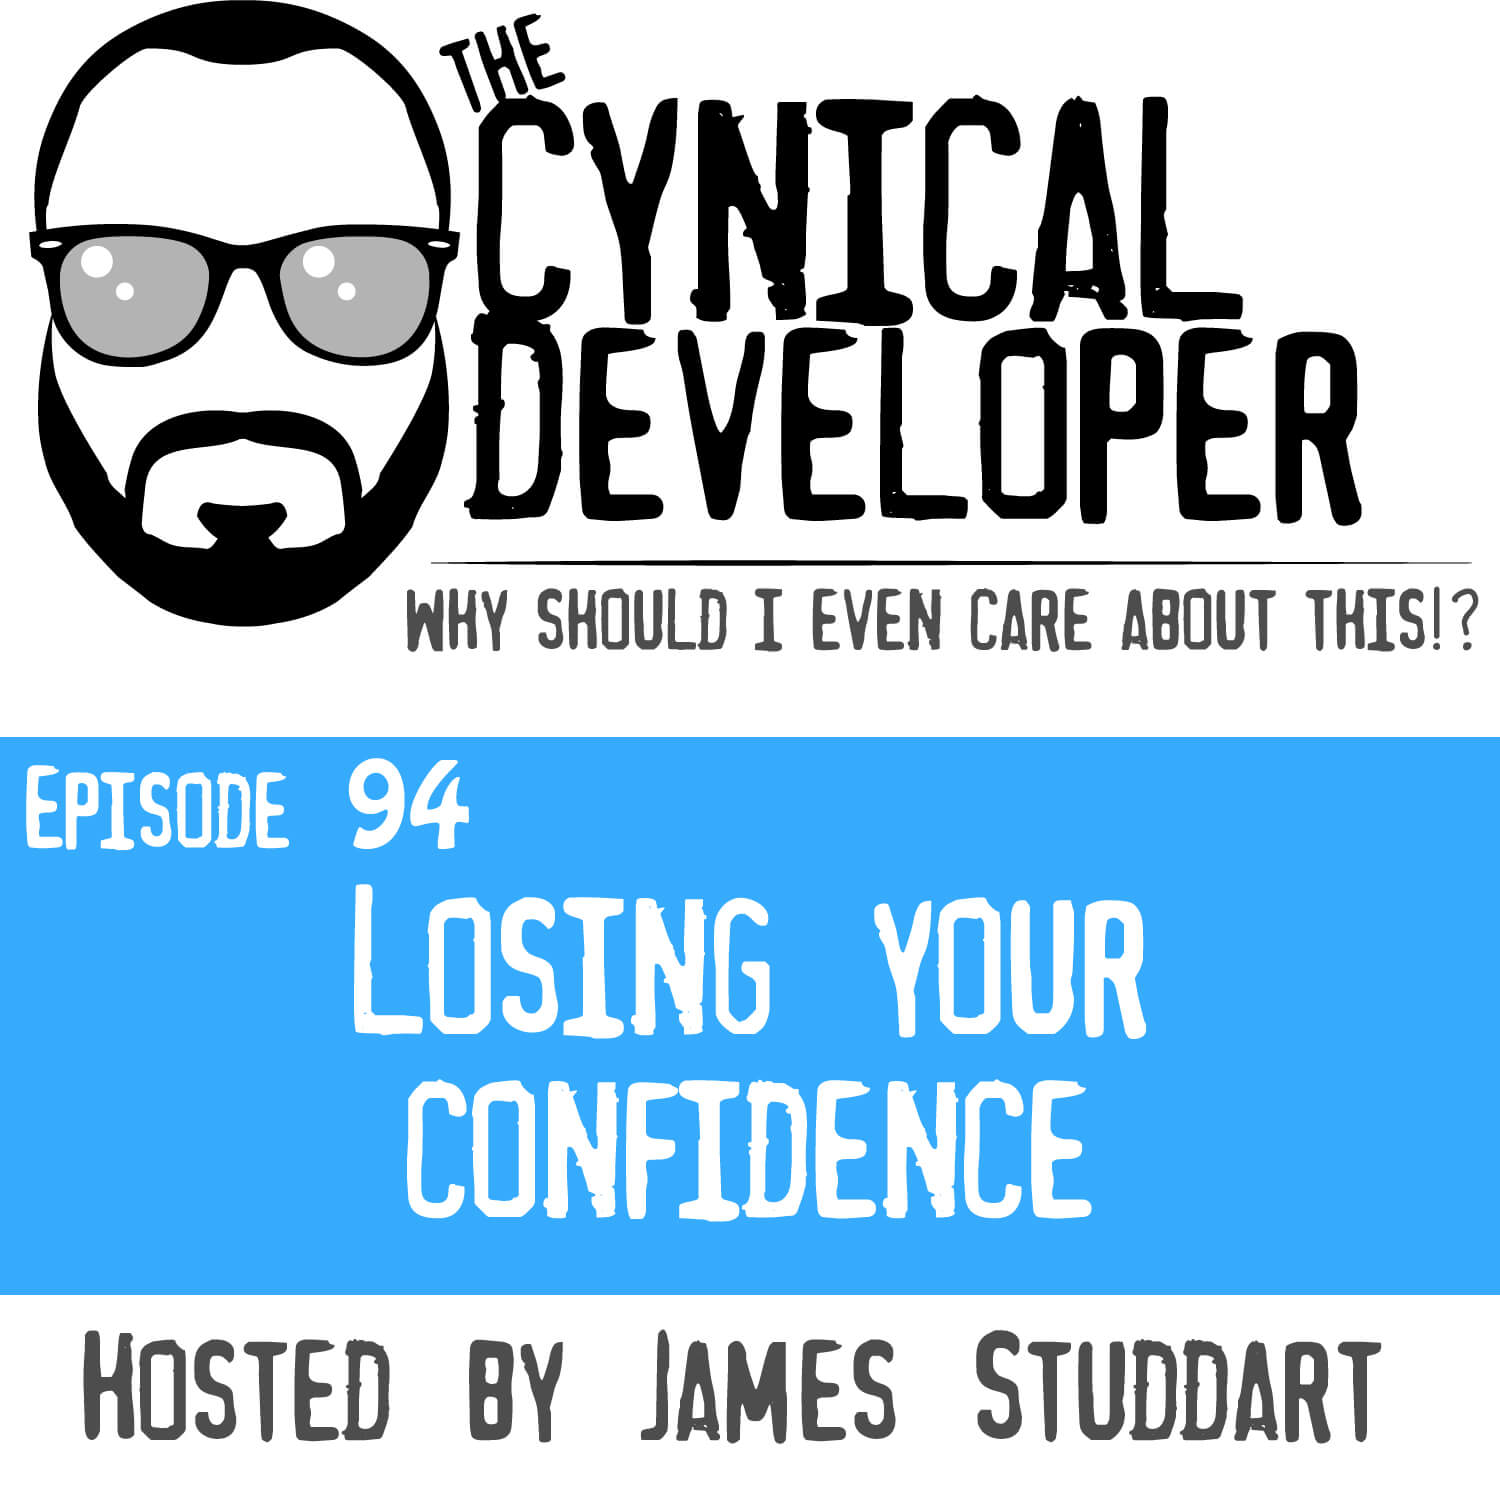 Episode 94 - Losing your confidence